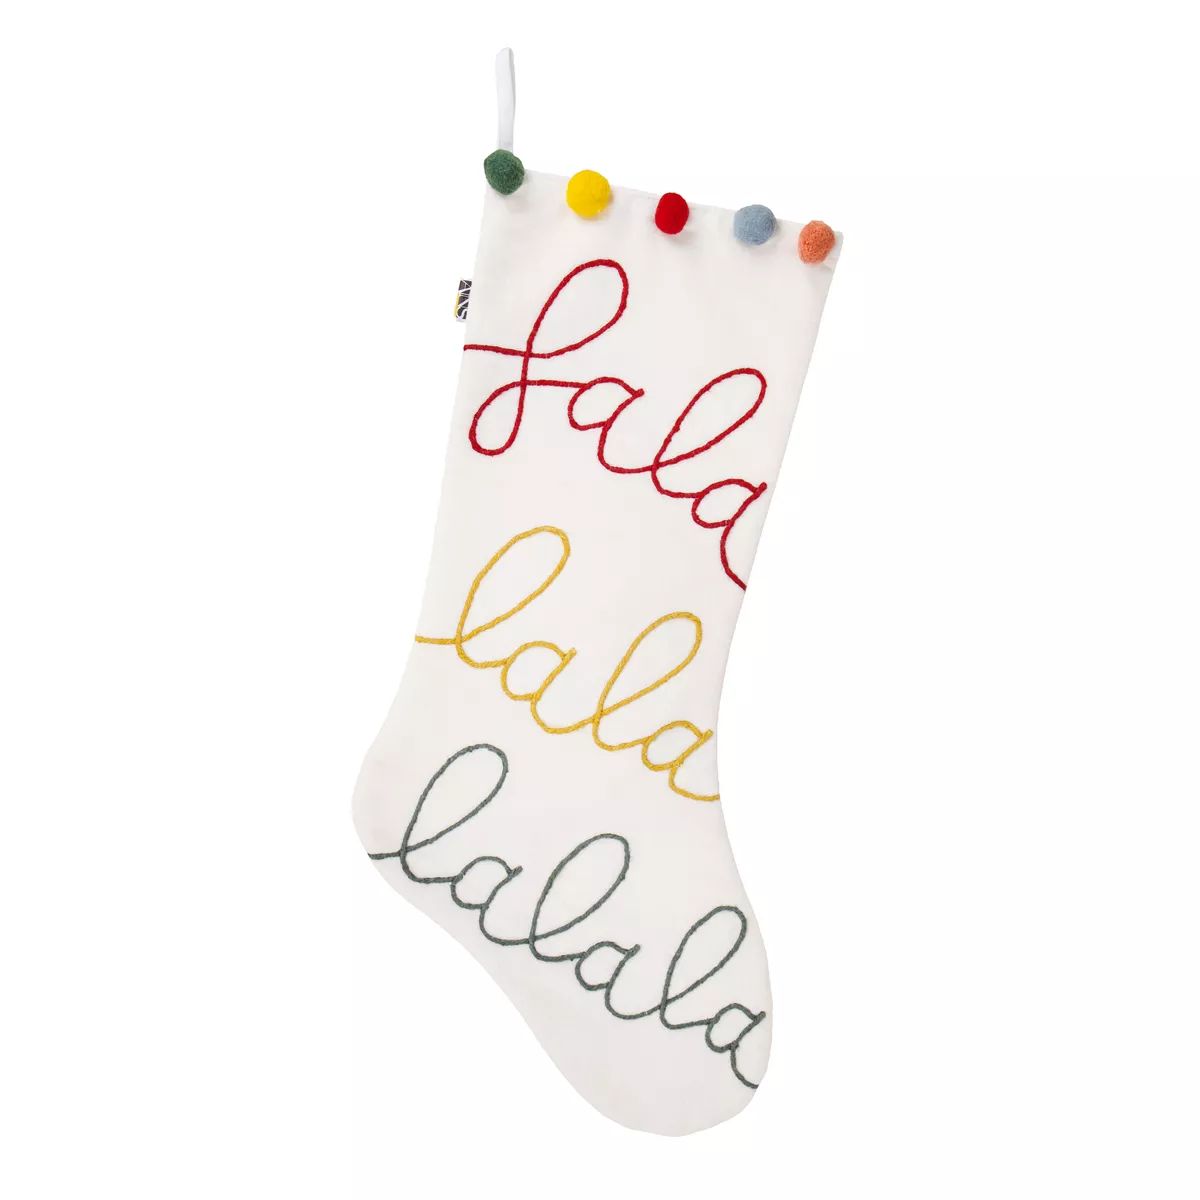 HGTV Home Collection "Falala" Embroidered Christmas Stocking, White, 20 in | Target